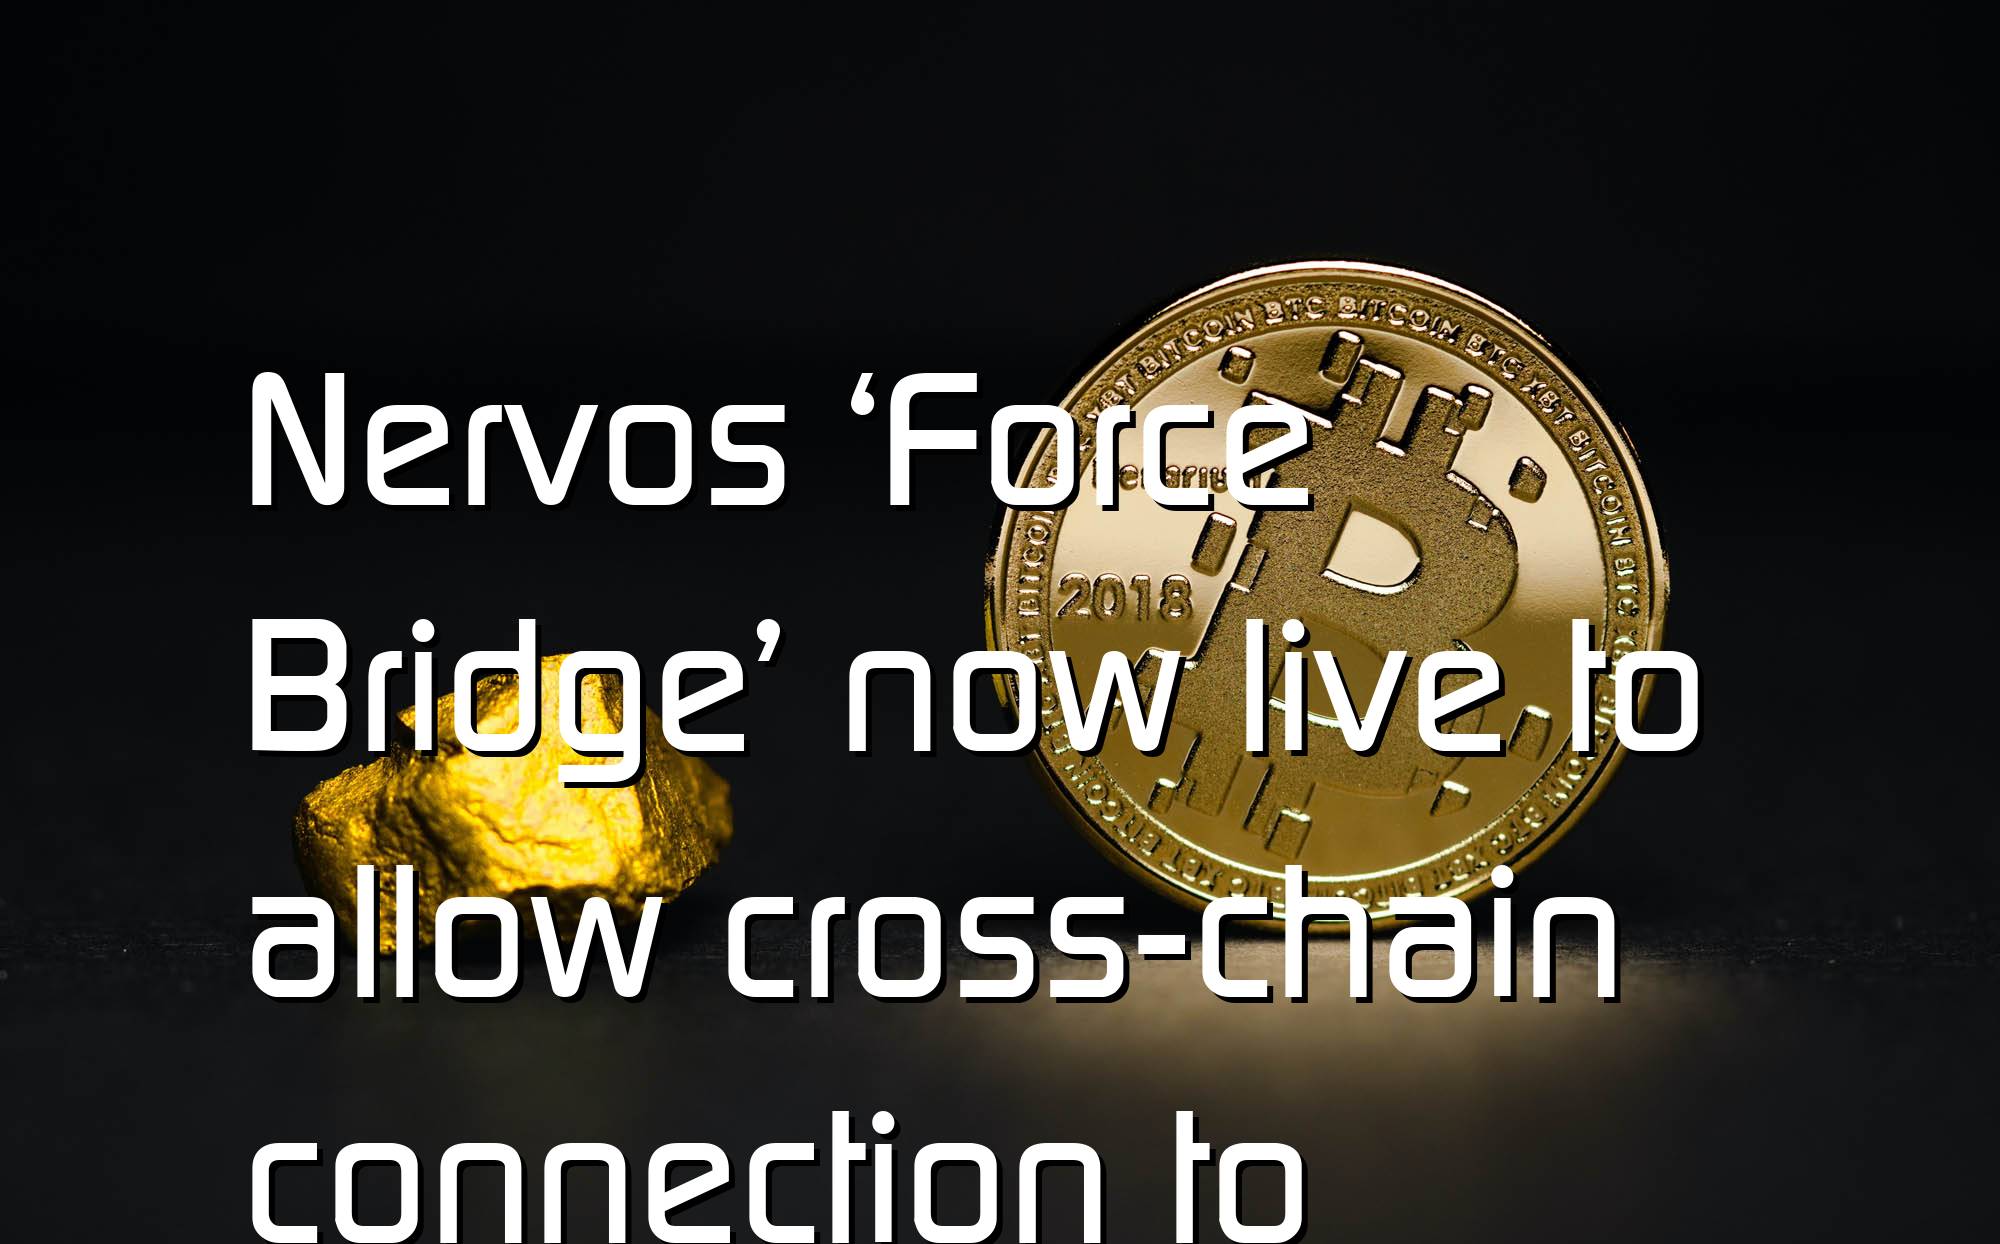 @$62976: Nervos ‘Force Bridge’ now live to allow cross-chain connection to Ethereum, Cardano, Polkadot